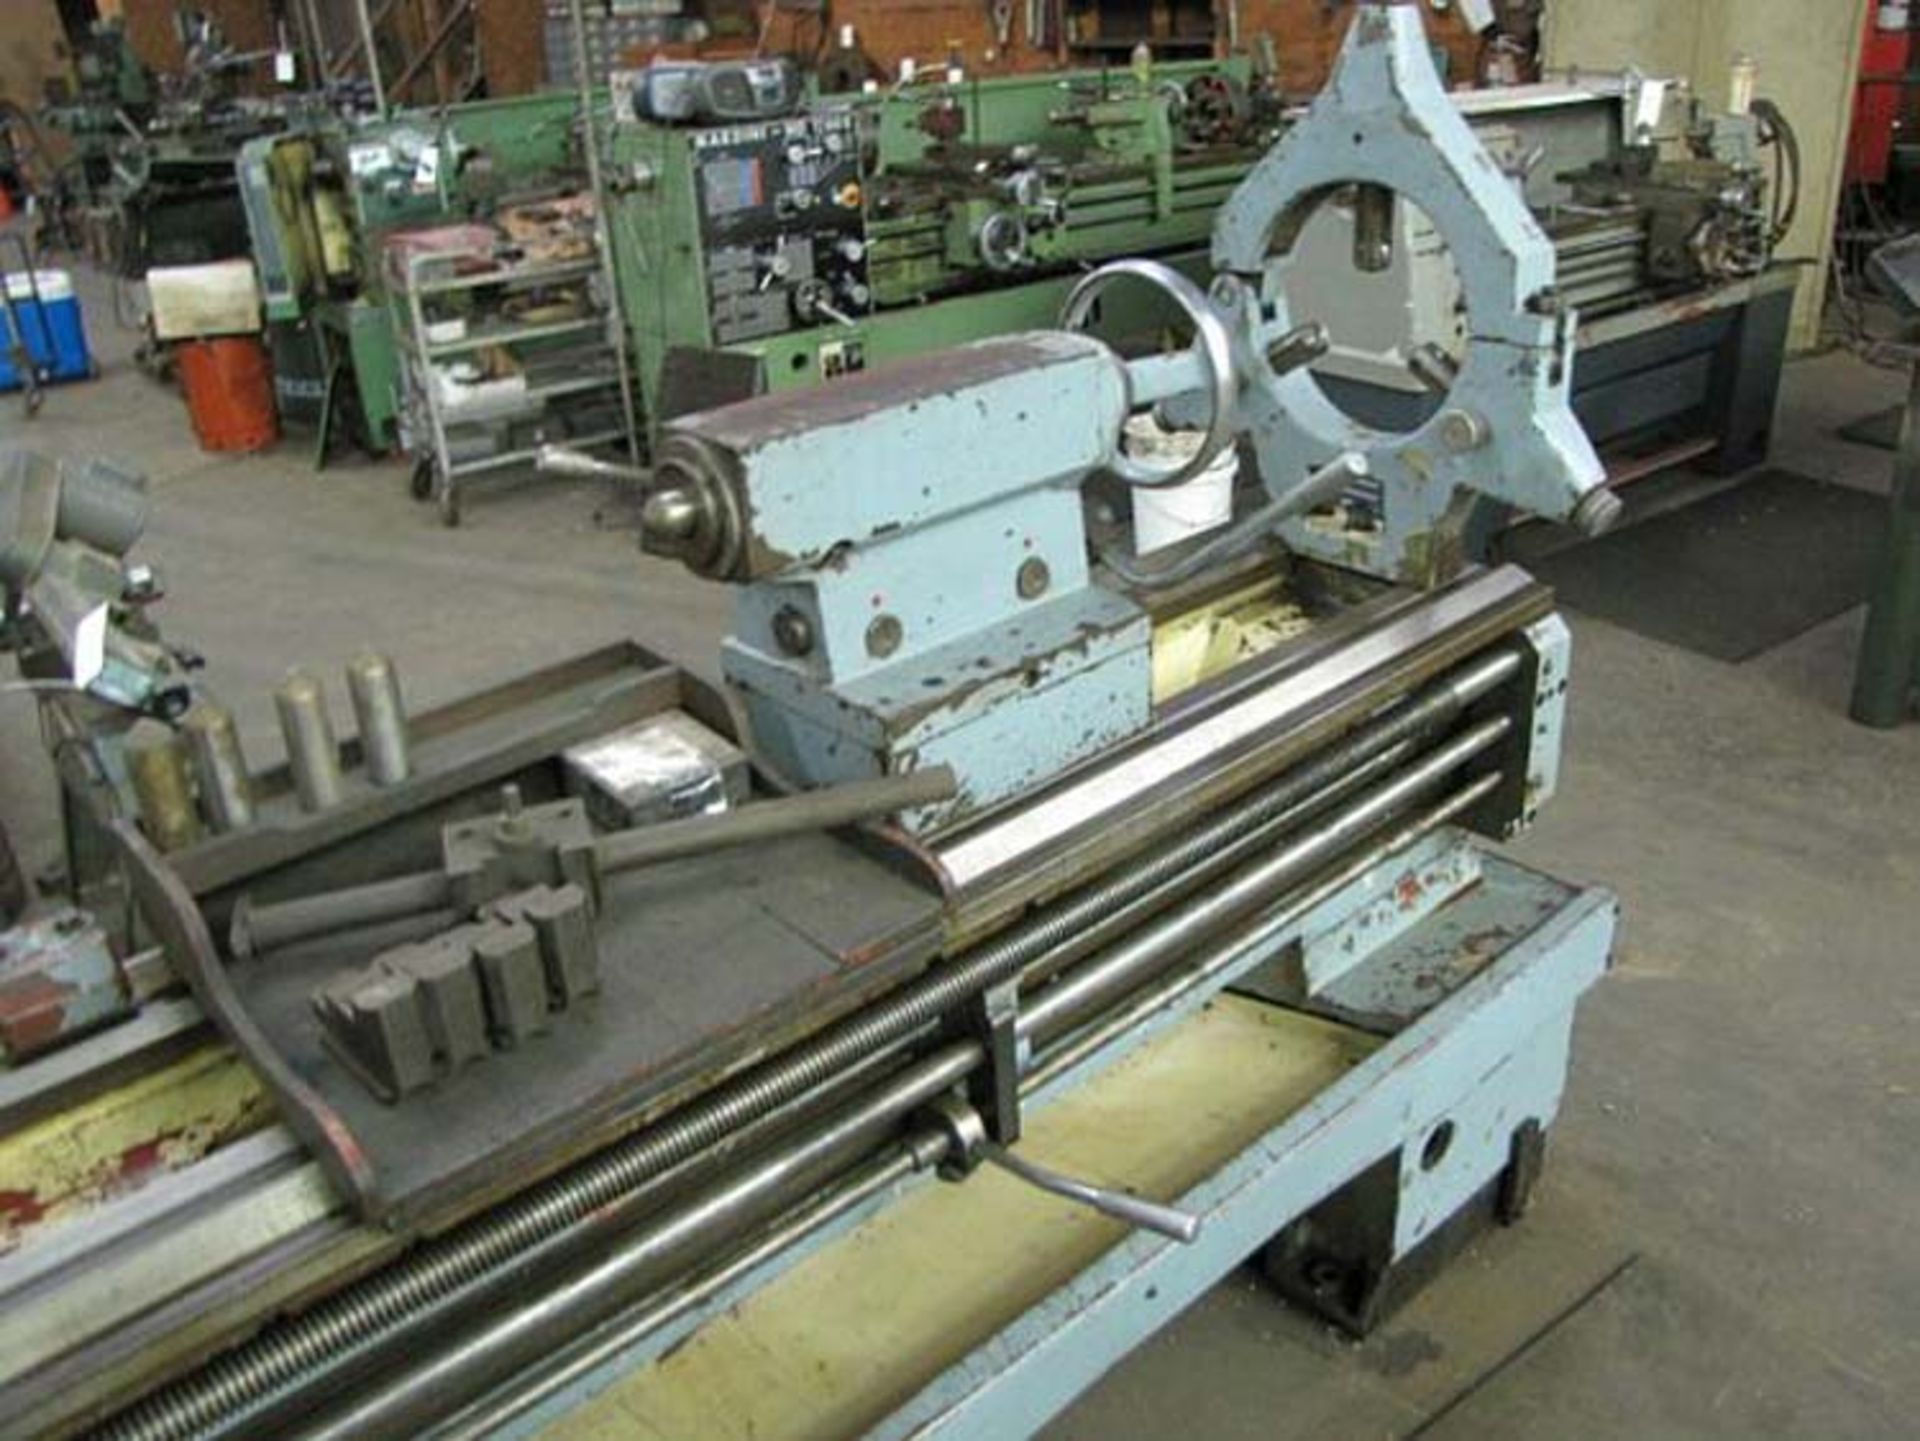 Polamco Wafum Engine Lathe, 25" x 80", Mdl: TUR 63A/80, S/N: 46417, Located In: Huntington Park, CA - Image 4 of 6